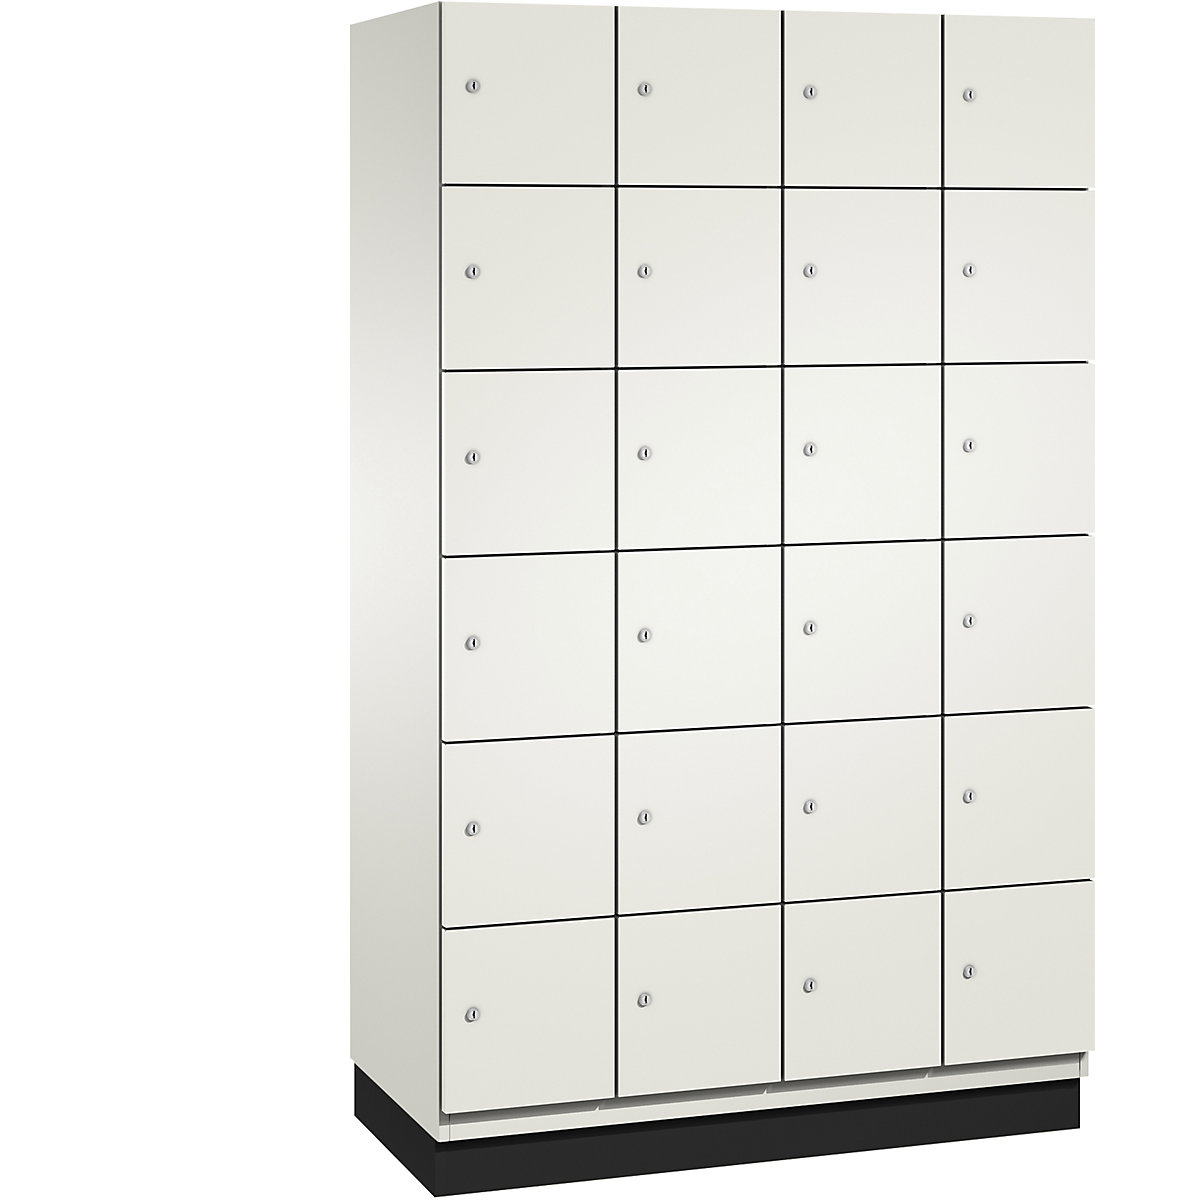 CAMBIO compartment locker with HPL doors – C+P, 24 compartments, body pure white / door white, width 1200 mm-2